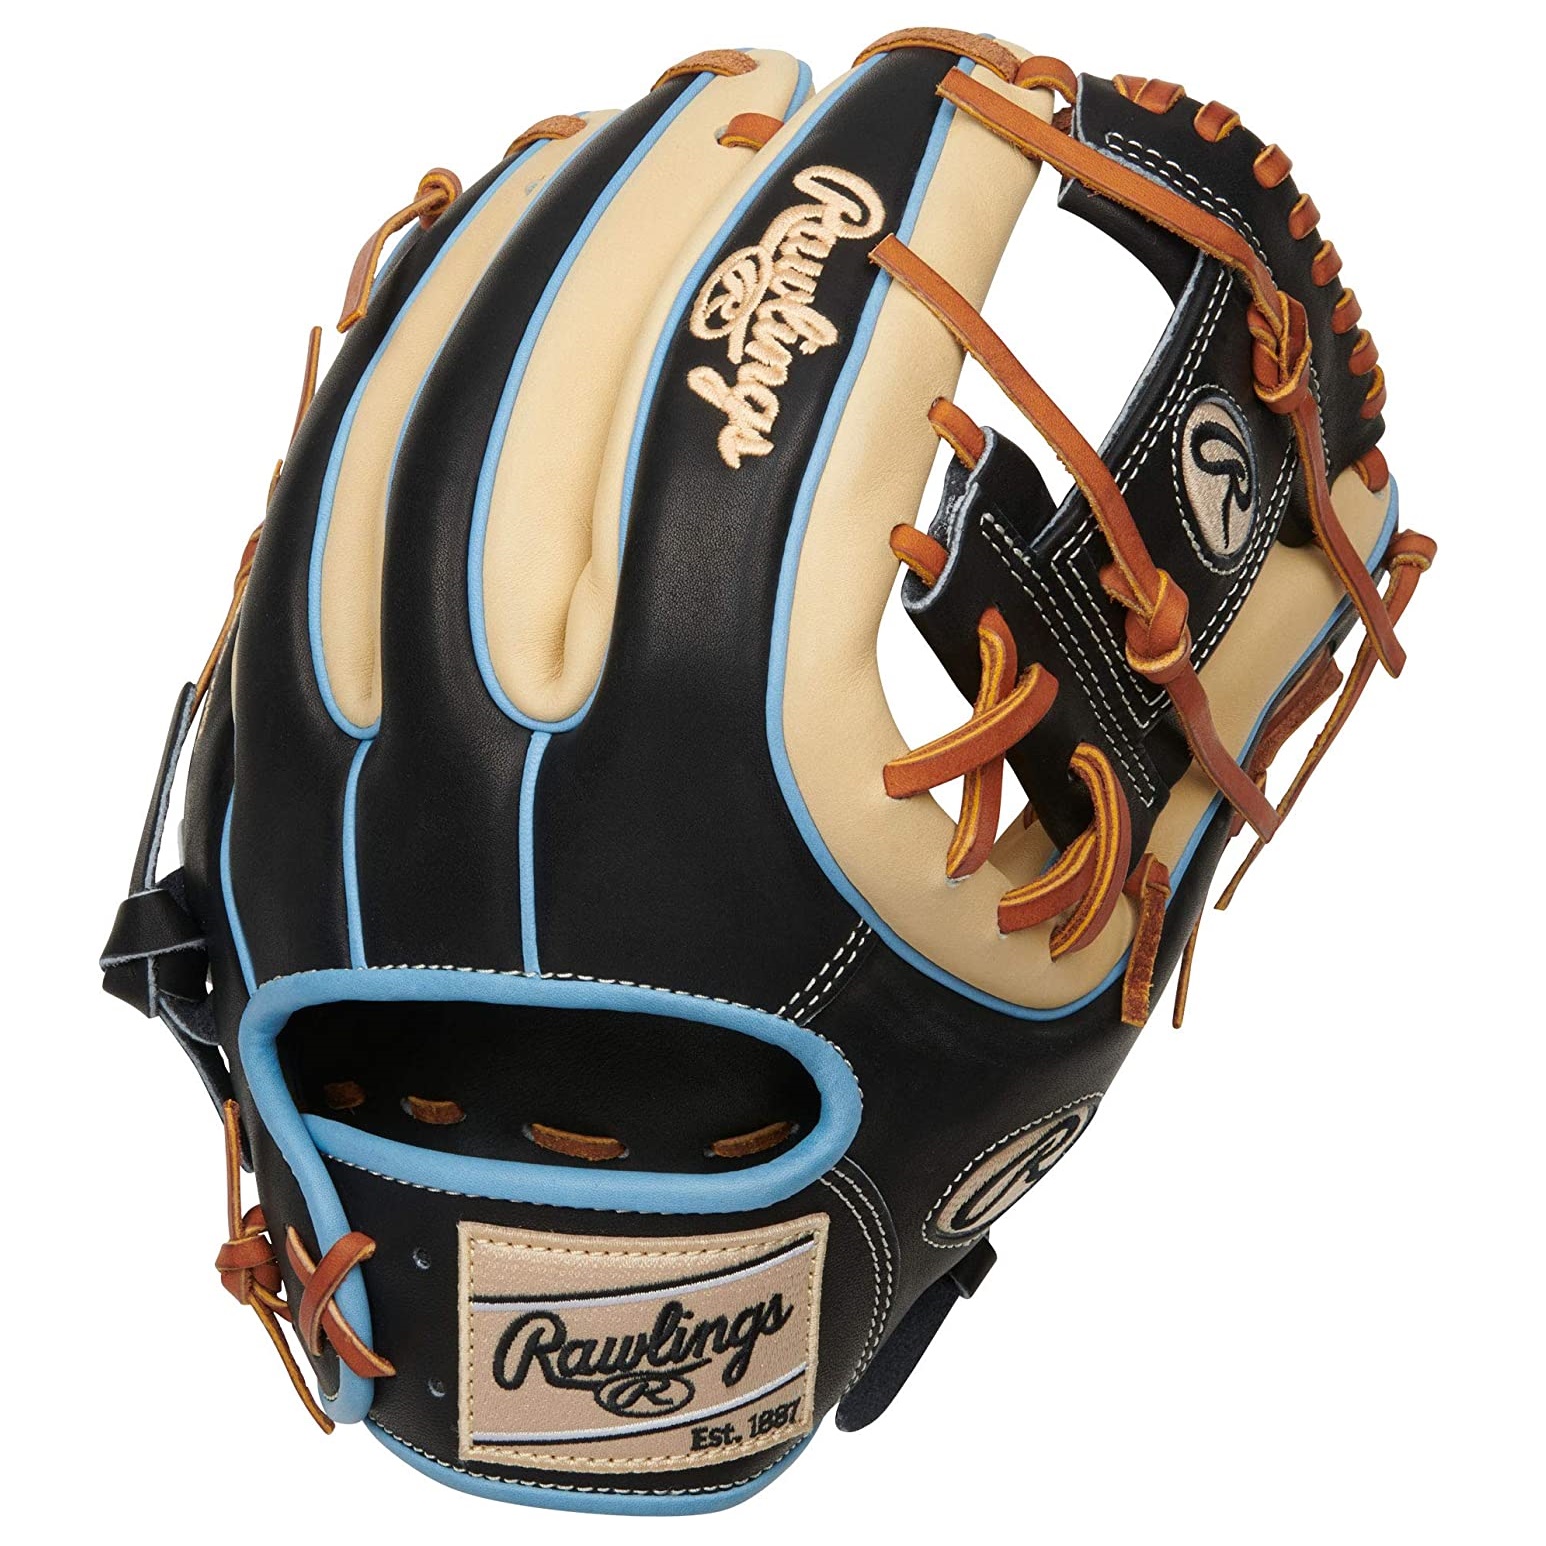 rawlings-heart-of-the-hide-baseball-glove-pro-i-web-11-75-inch-black-camel-tan-right-hand-throw PRO315-2CBC-RightHandThrow Rawlings  The 2021 11.75-inch Heart of the Hide infield glove offers unmatched